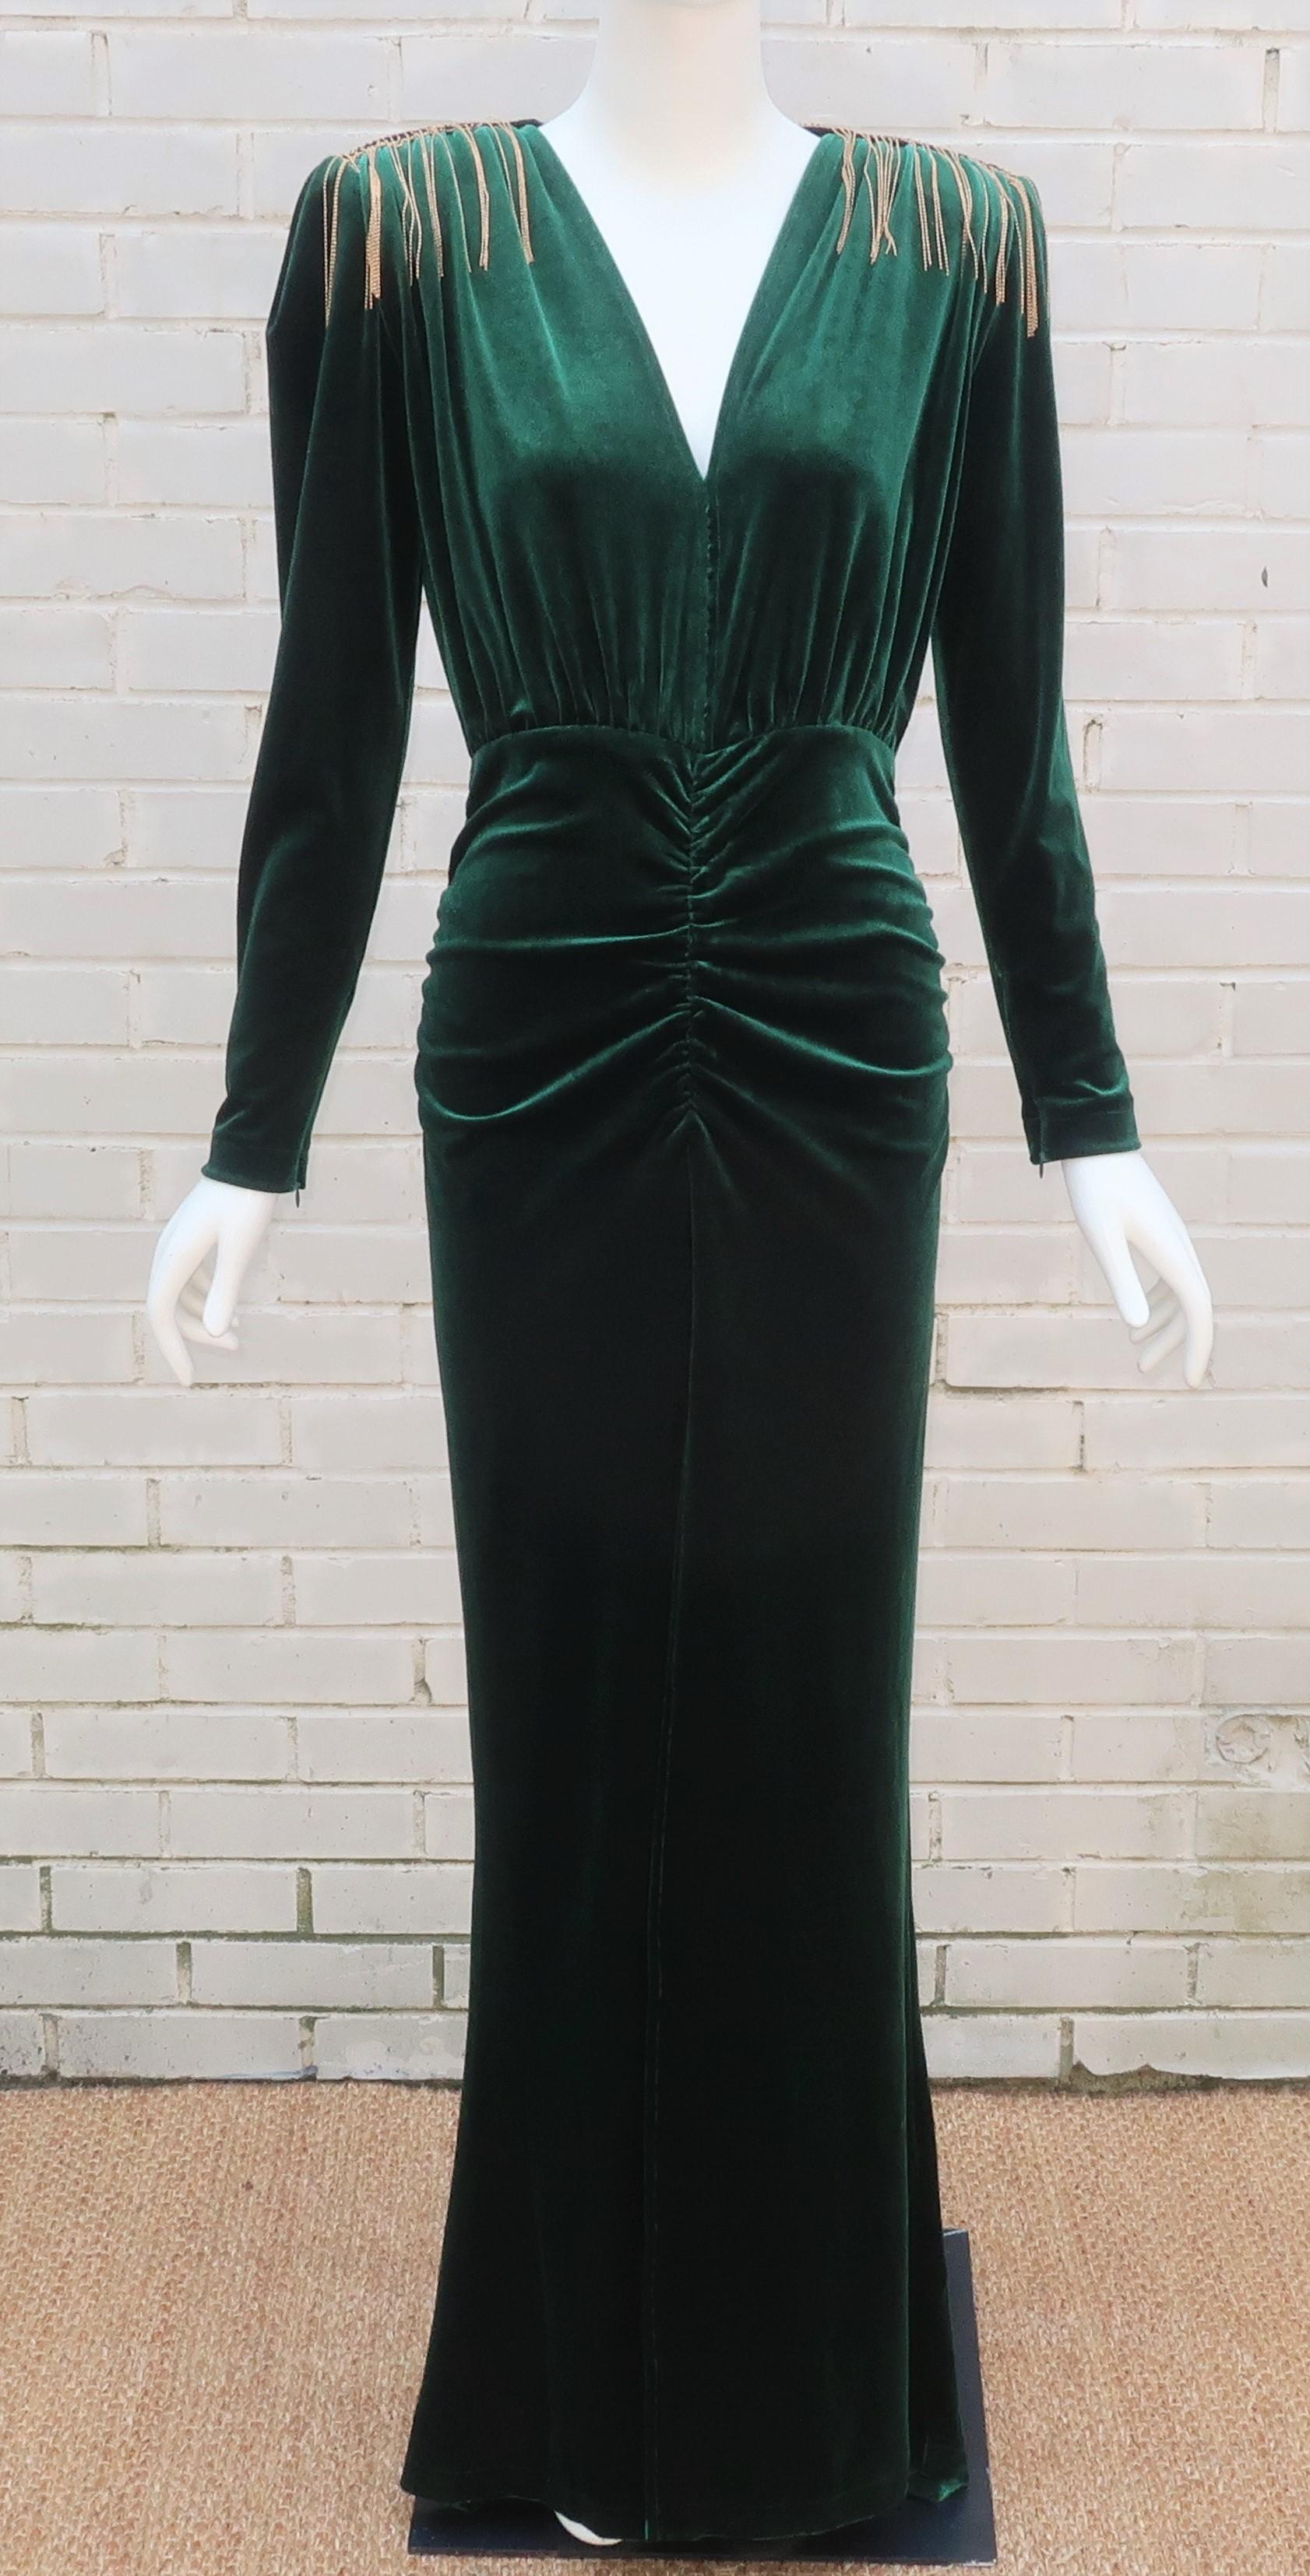 The Australian label, Bronx & Banco, channels an ultra glamorous Old Hollywood look with this dark green velvet maxi dress embellished with gold micro bead fringe at the shoulders.  The lush velvet fabric is a blend of viscose, silk and nylon which